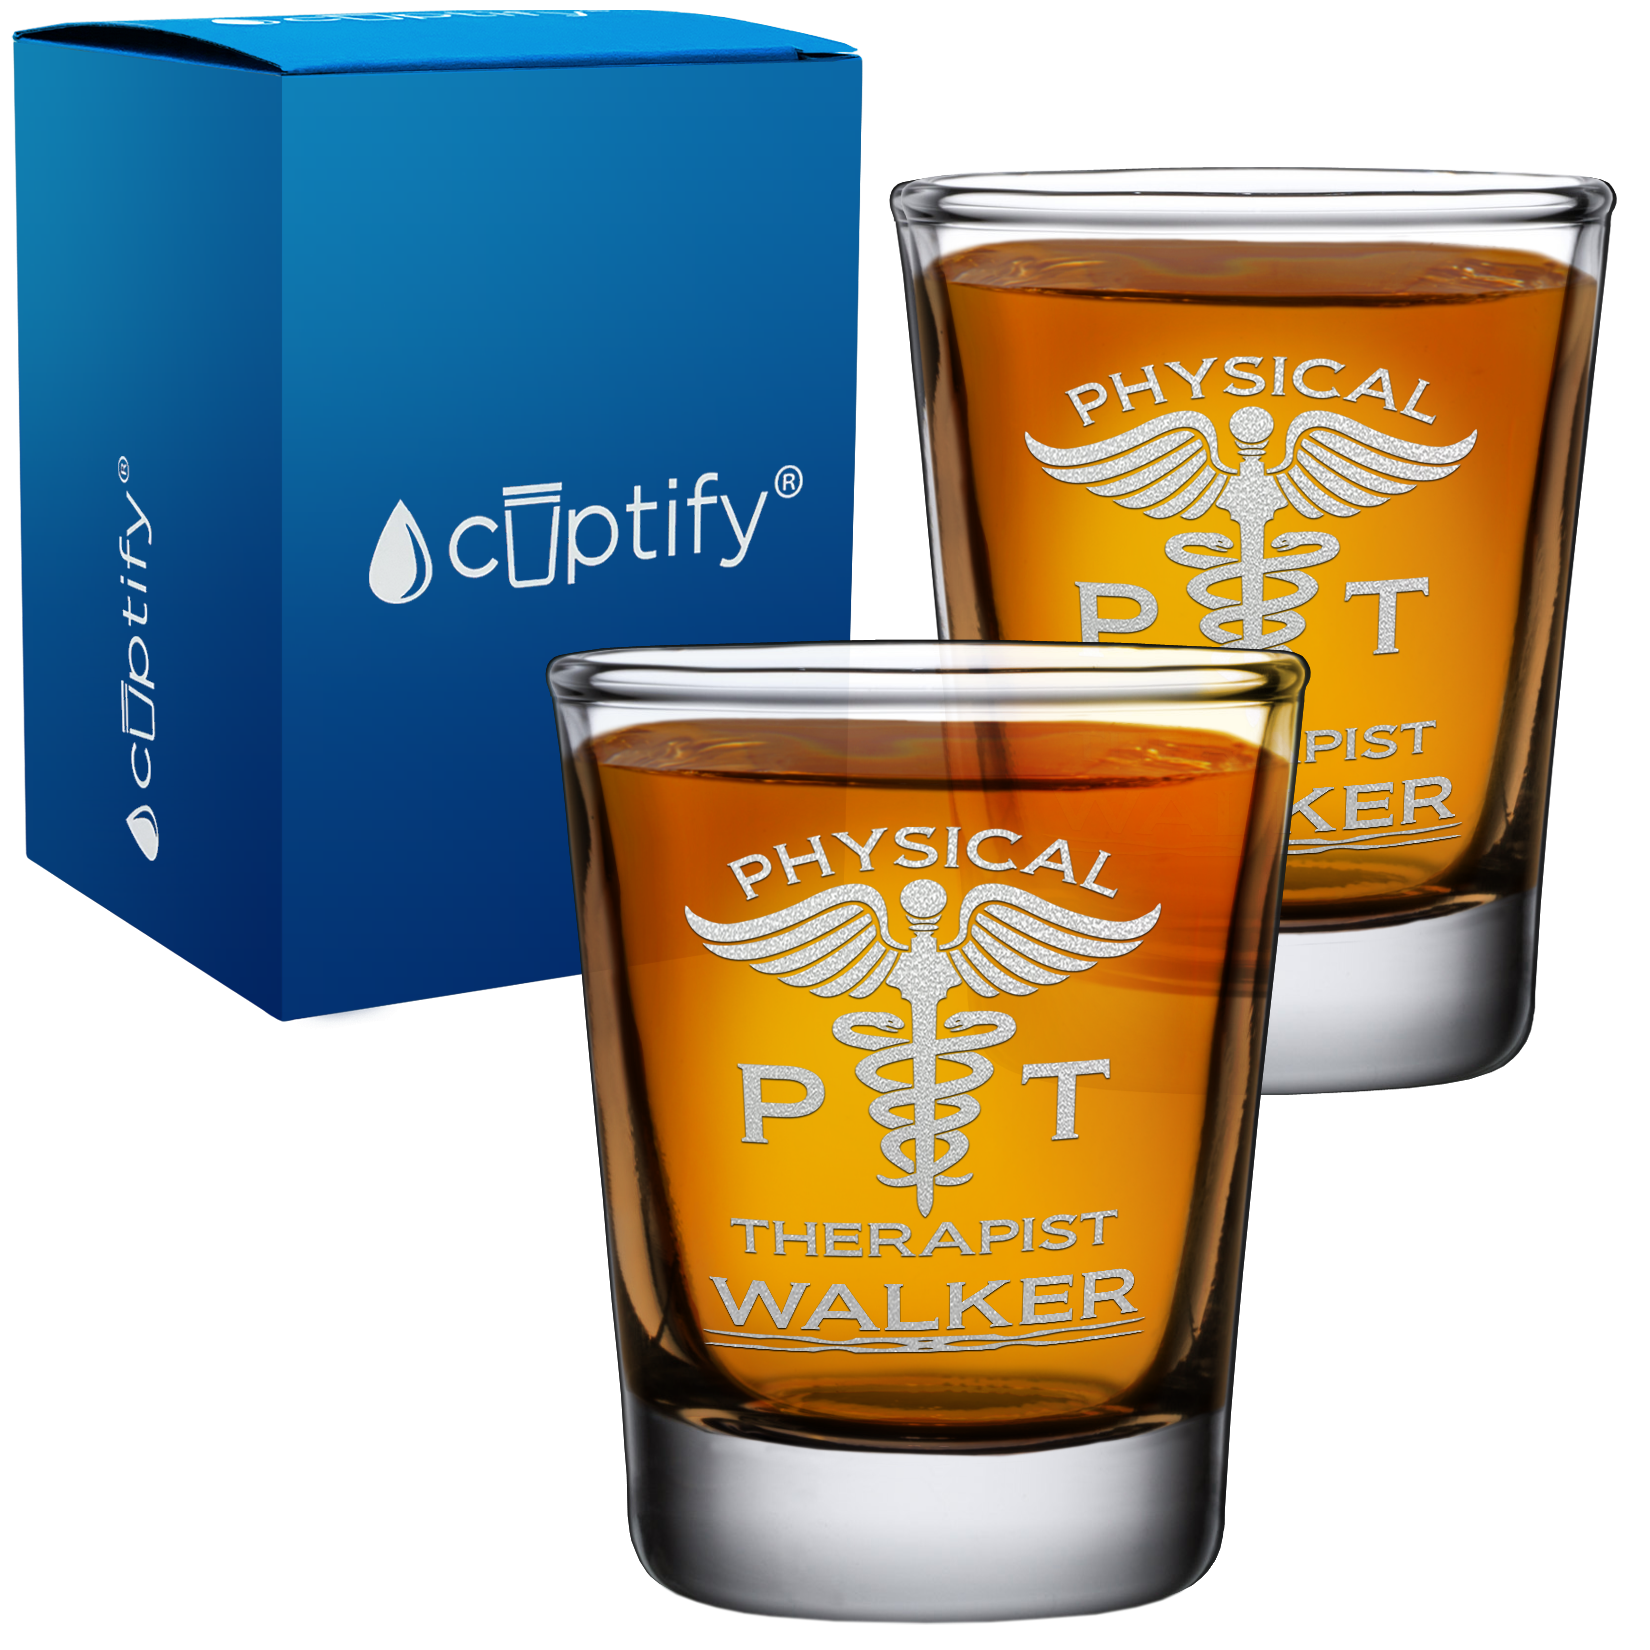 Personalized PT Physical Therapist on 2oz Shot Glasses - Set of 2